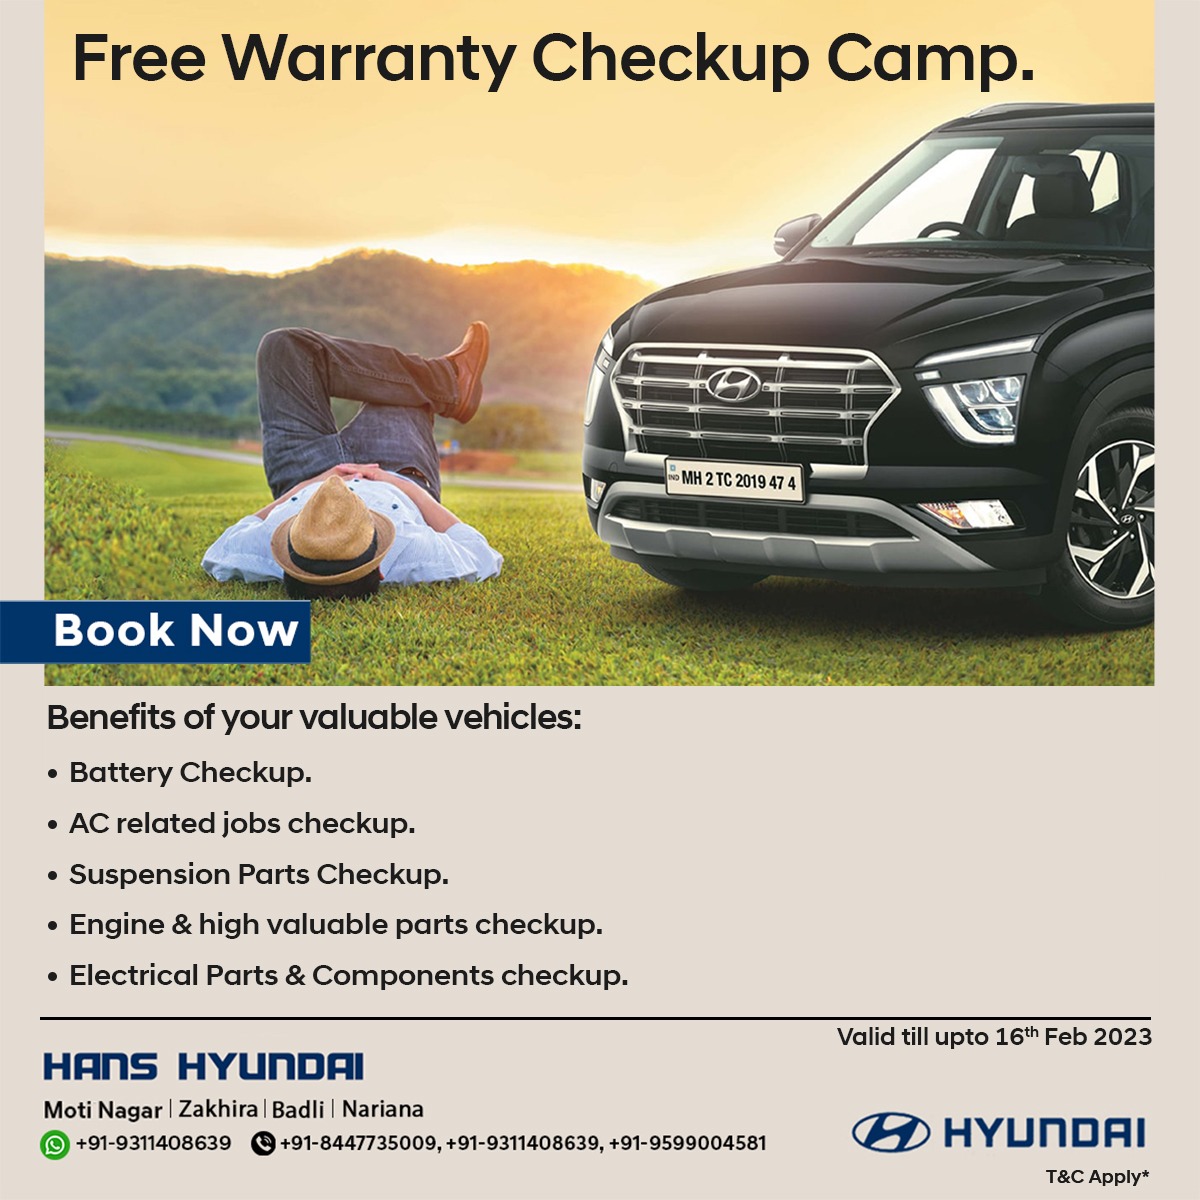 Free Warranty Checkup Camp. Car Offers